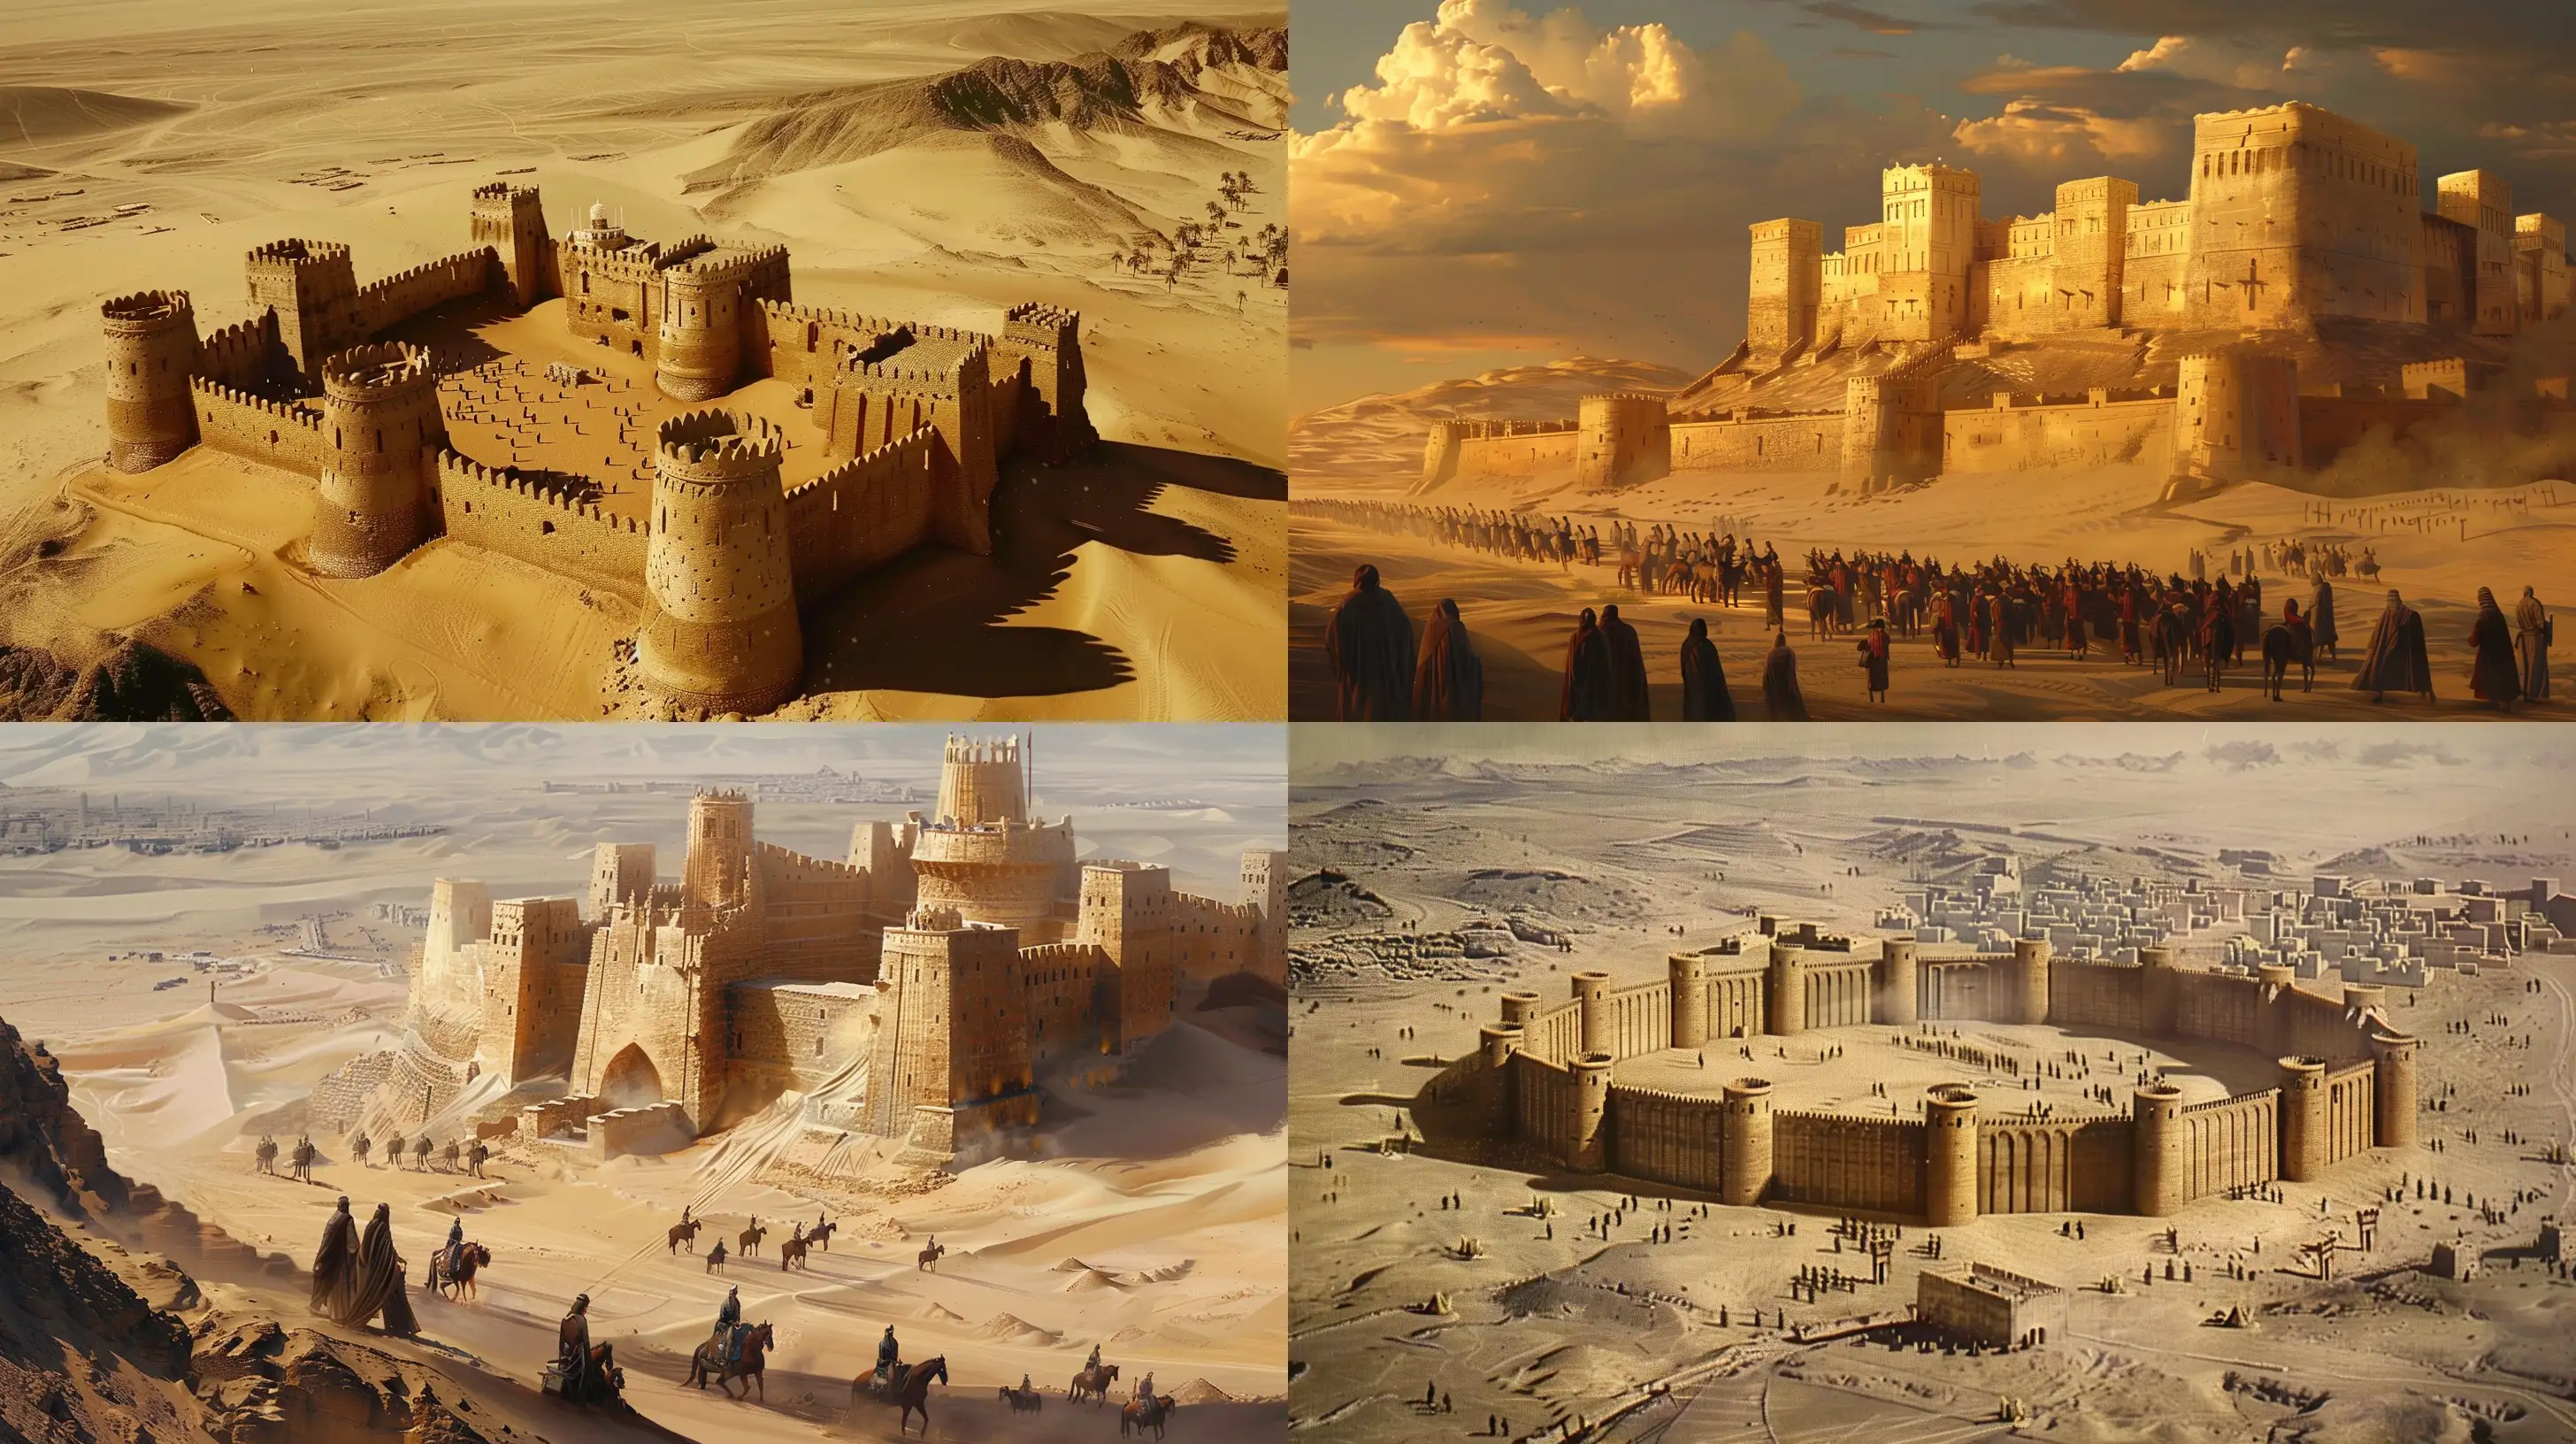 Muslims surround the 8 forts of Khaybar in the deserts of Arabia, artistic style --ar 16:9